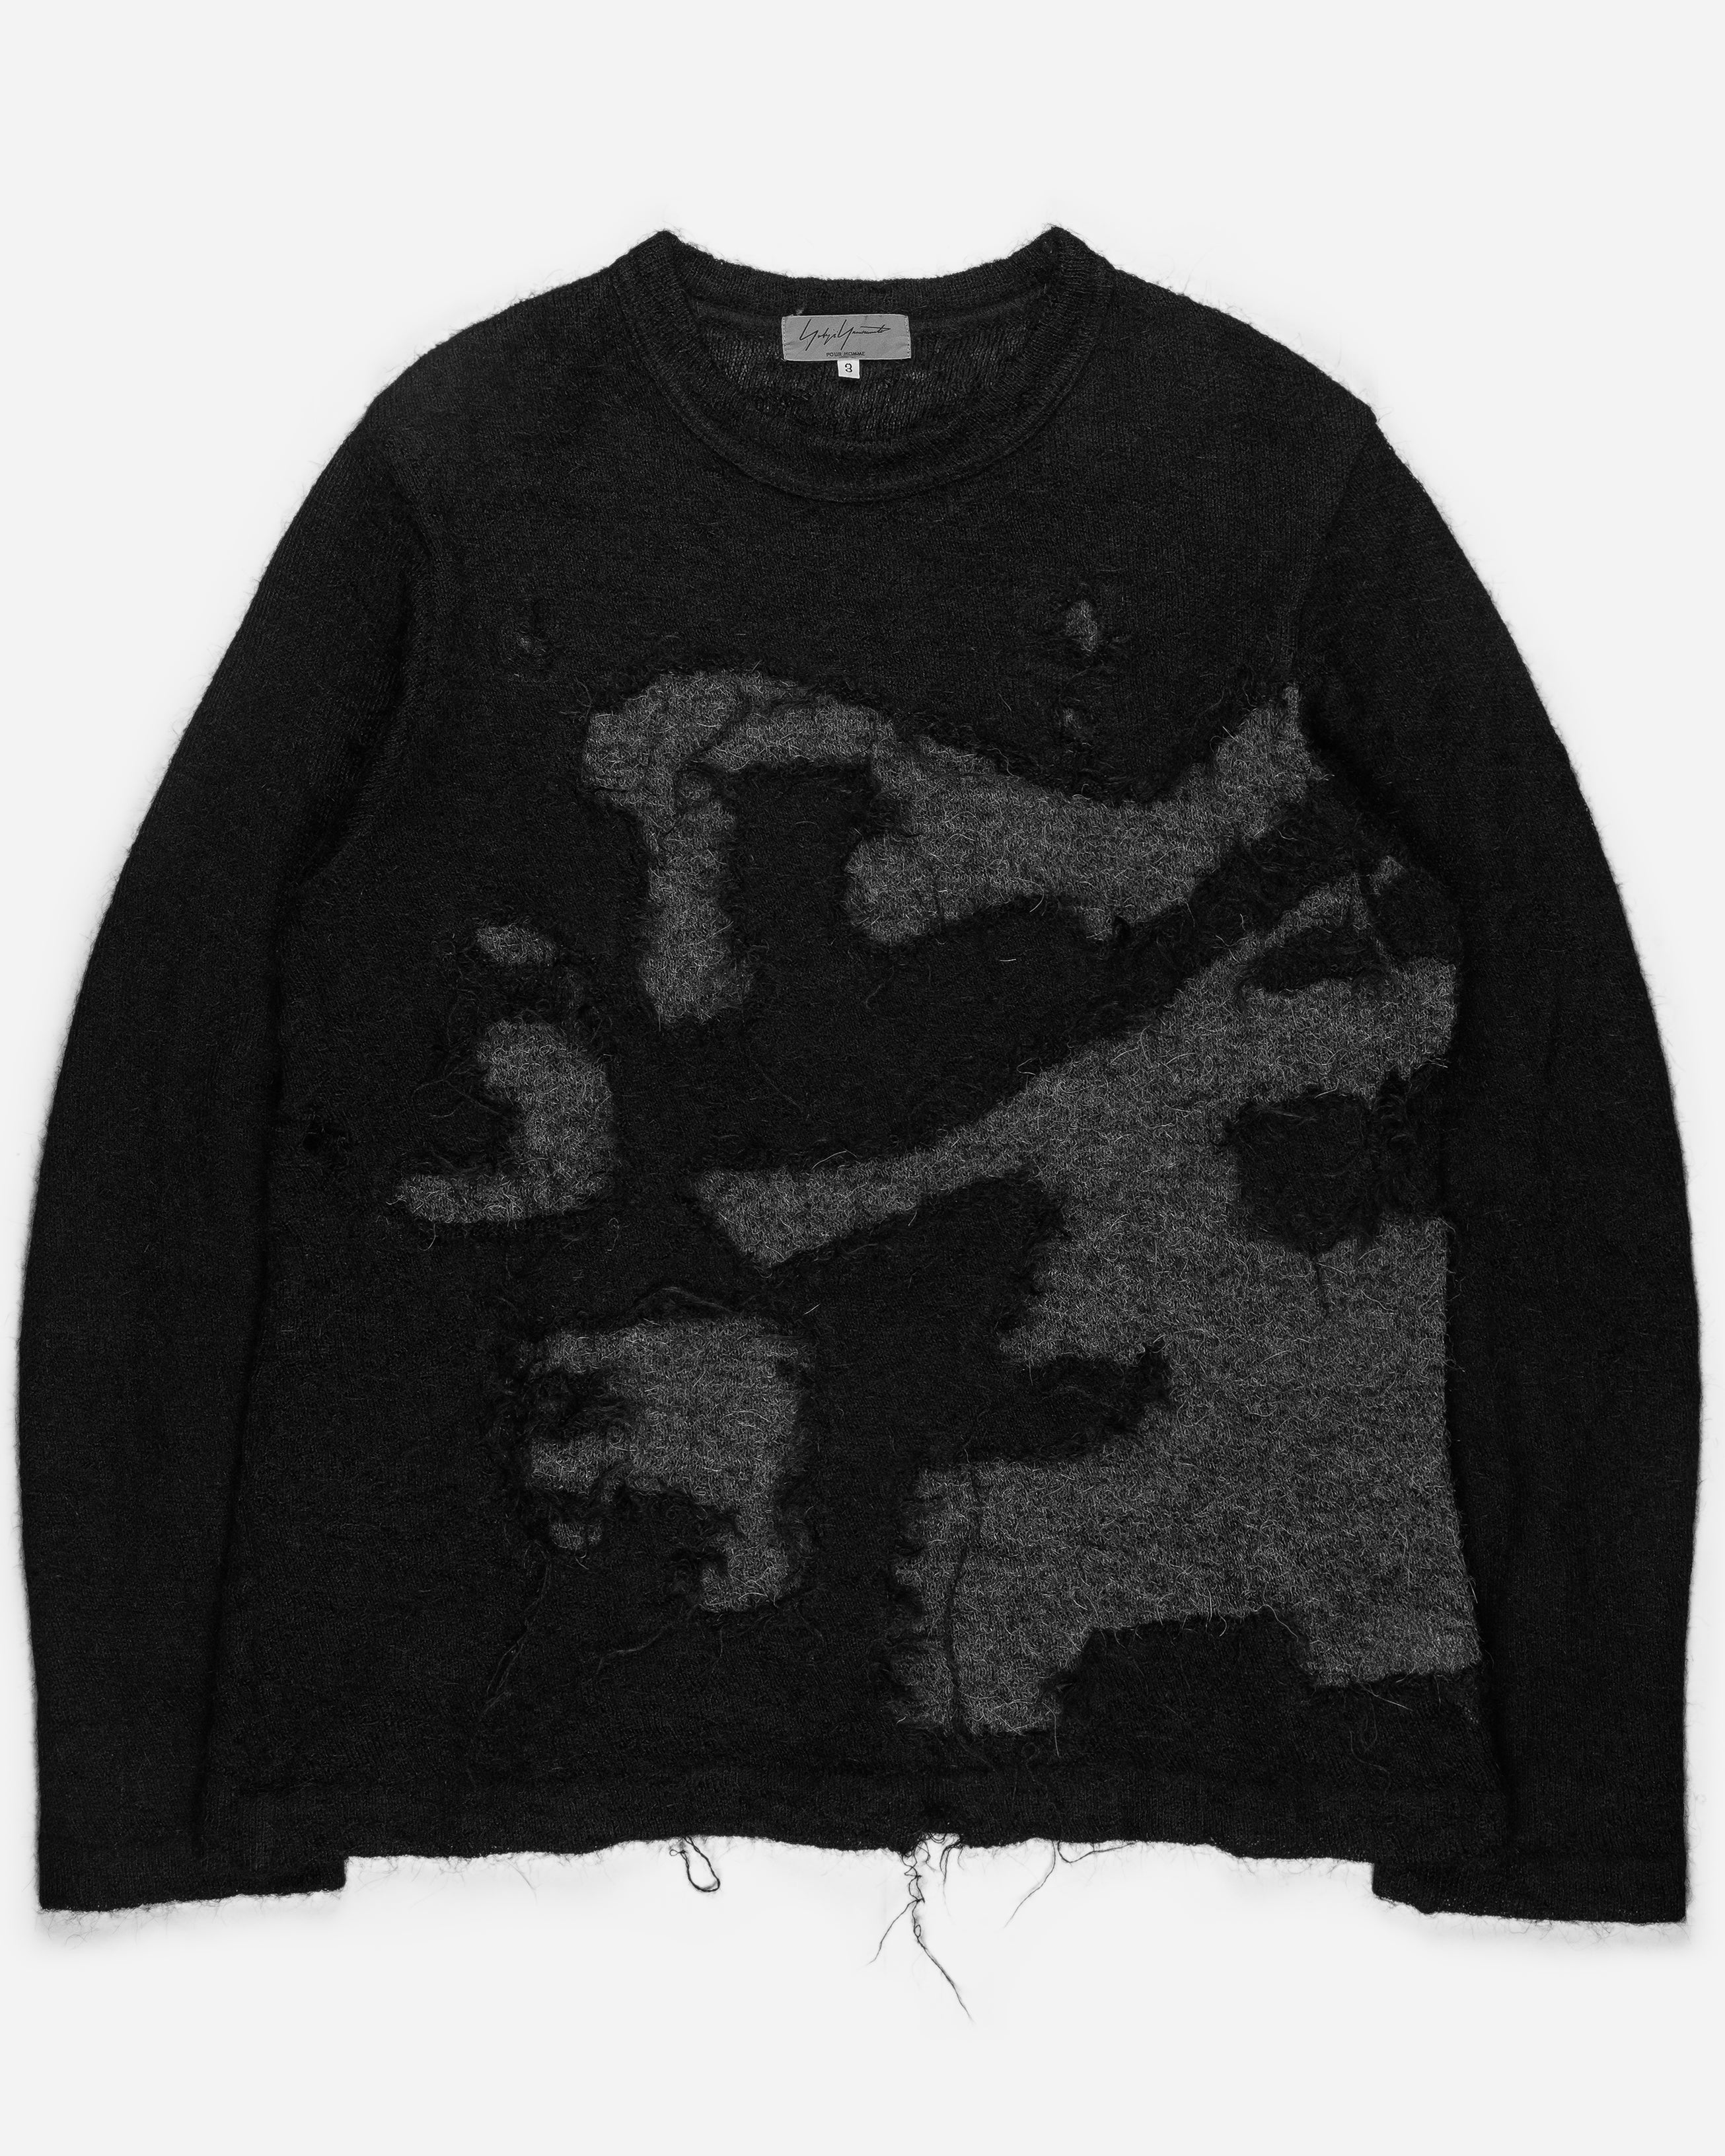 Yohji Yamamoto Pour Homme Abstract Distressed Alpaca Knitted Sweater - AW04